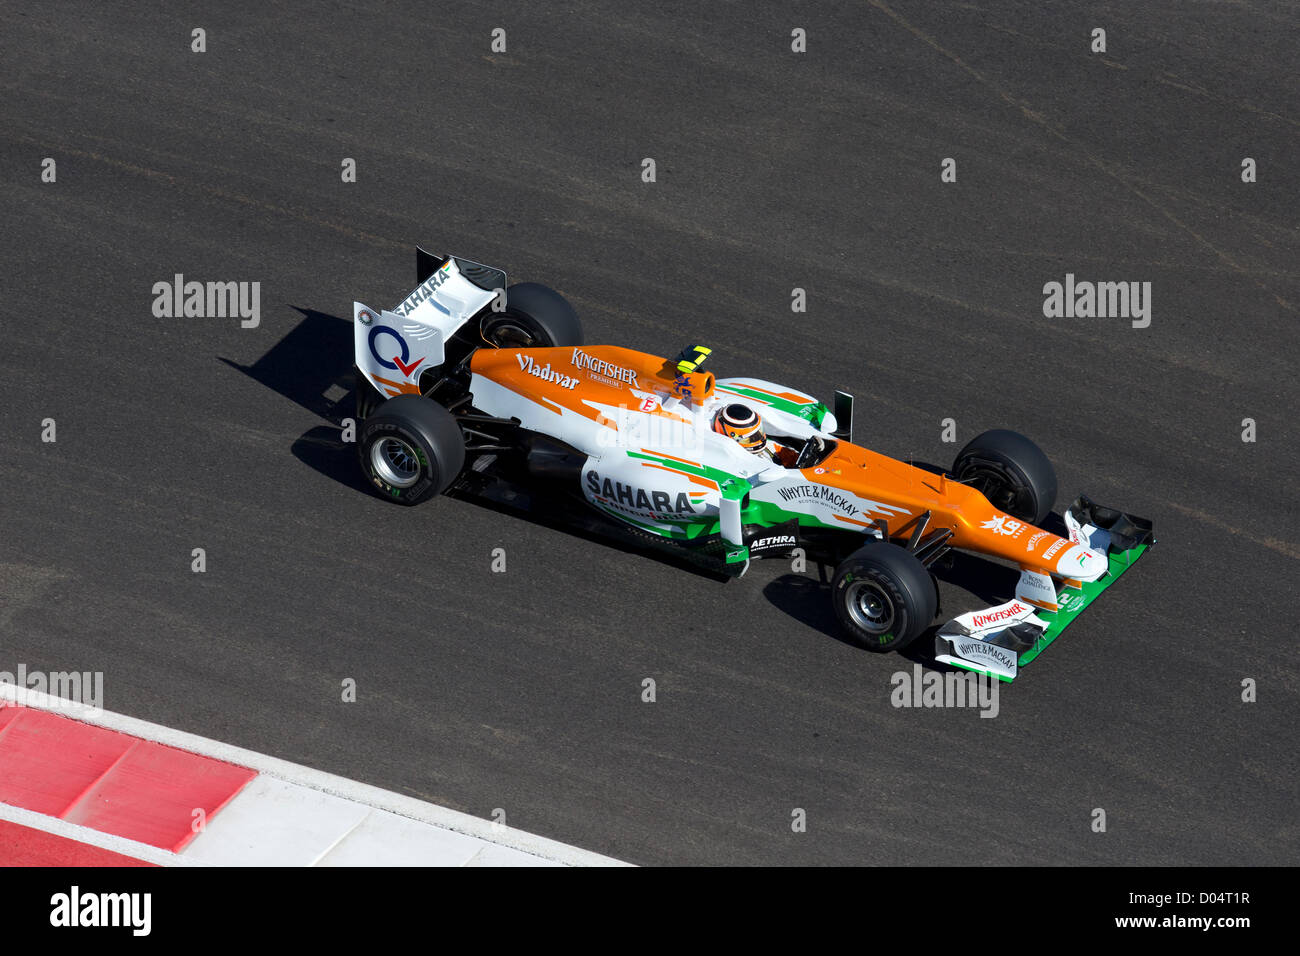 Driver Paul Di Resta of Sahara Force India F1 during practice for the United States Grand Prix at Circuit of the Americas Stock Photo